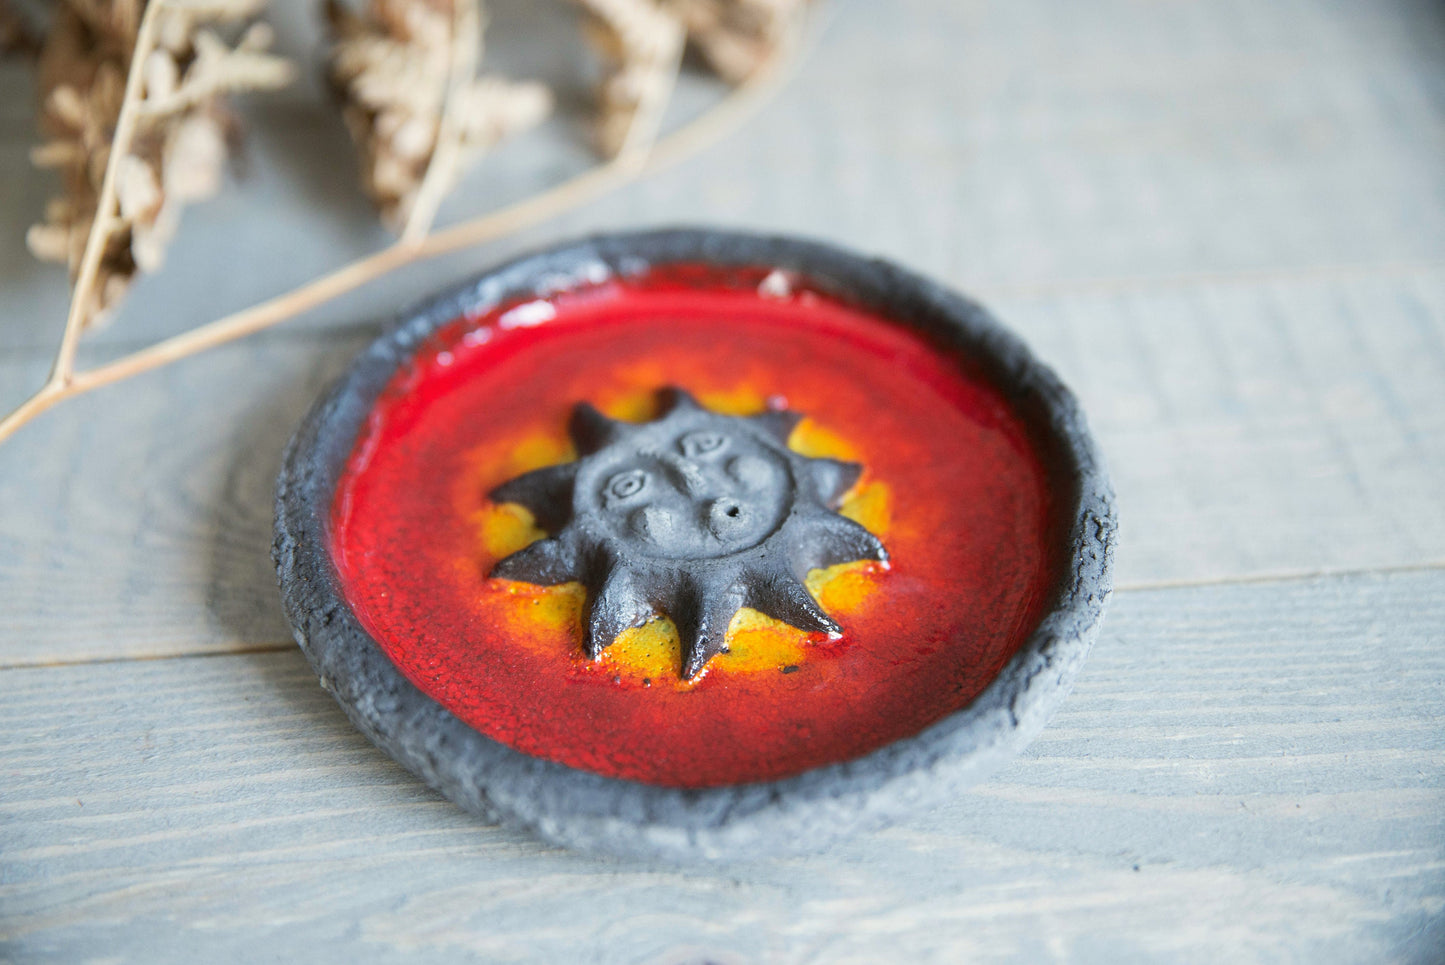 Red ceramic incense stick holder with the sun - Incense burner pottery plate with red glaze